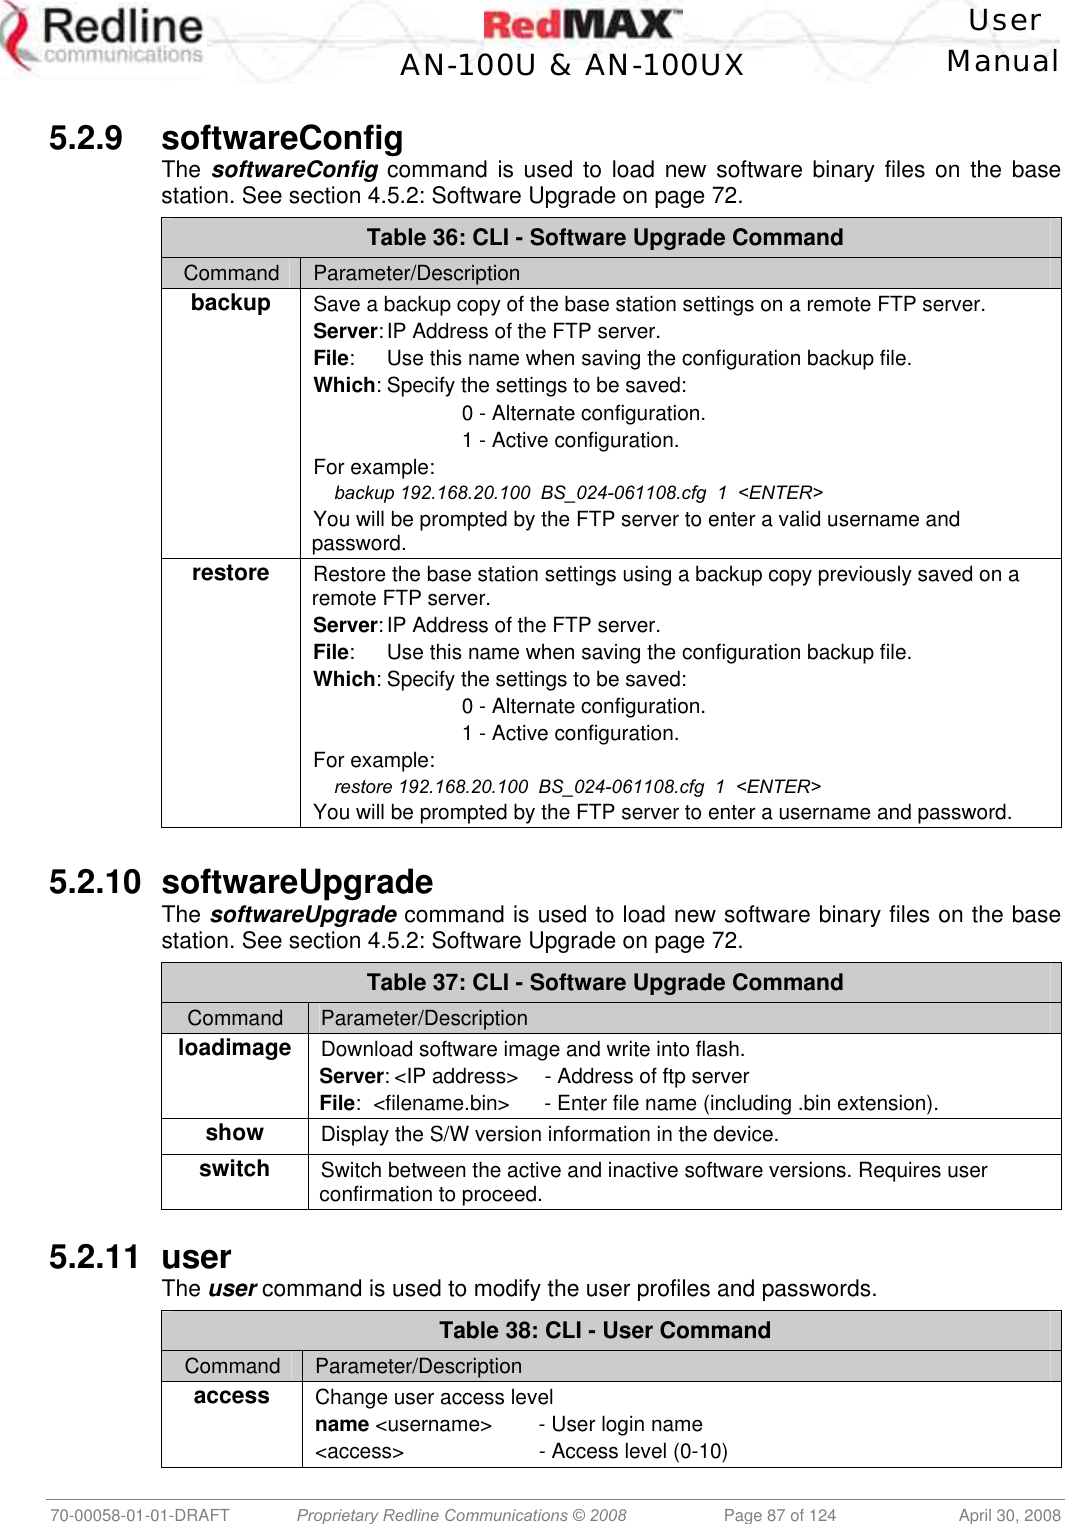    User  AN-100U &amp; AN-100UX Manual   70-00058-01-01-DRAFT  Proprietary Redline Communications © 2008   Page 87 of 124  April 30, 2008  5.2.9 softwareConfig The softwareConfig command is used to load new software binary files on the base station. See section 4.5.2: Software Upgrade on page 72. Table 36: CLI - Software Upgrade Command Command  Parameter/Description backup Save a backup copy of the base station settings on a remote FTP server. Server: IP Address of the FTP server. File:  Use this name when saving the configuration backup file. Which: Specify the settings to be saved:     0 - Alternate configuration.     1 - Active configuration. For example:      backup 192.168.20.100  BS_024-061108.cfg  1  &lt;ENTER&gt; You will be prompted by the FTP server to enter a valid username and password. restore Restore the base station settings using a backup copy previously saved on a remote FTP server. Server: IP Address of the FTP server. File:  Use this name when saving the configuration backup file. Which: Specify the settings to be saved:     0 - Alternate configuration.     1 - Active configuration. For example:      restore 192.168.20.100  BS_024-061108.cfg  1  &lt;ENTER&gt; You will be prompted by the FTP server to enter a username and password.  5.2.10 softwareUpgrade The softwareUpgrade command is used to load new software binary files on the base station. See section 4.5.2: Software Upgrade on page 72. Table 37: CLI - Software Upgrade Command Command  Parameter/Description loadimage Download software image and write into flash. Server: &lt;IP address&gt;  - Address of ftp server File:  &lt;filename.bin&gt;  - Enter file name (including .bin extension). show Display the S/W version information in the device. switch Switch between the active and inactive software versions. Requires user confirmation to proceed.  5.2.11 user The user command is used to modify the user profiles and passwords. Table 38: CLI - User Command Command  Parameter/Description access Change user access level name &lt;username&gt;  - User login name &lt;access&gt;    - Access level (0-10) 